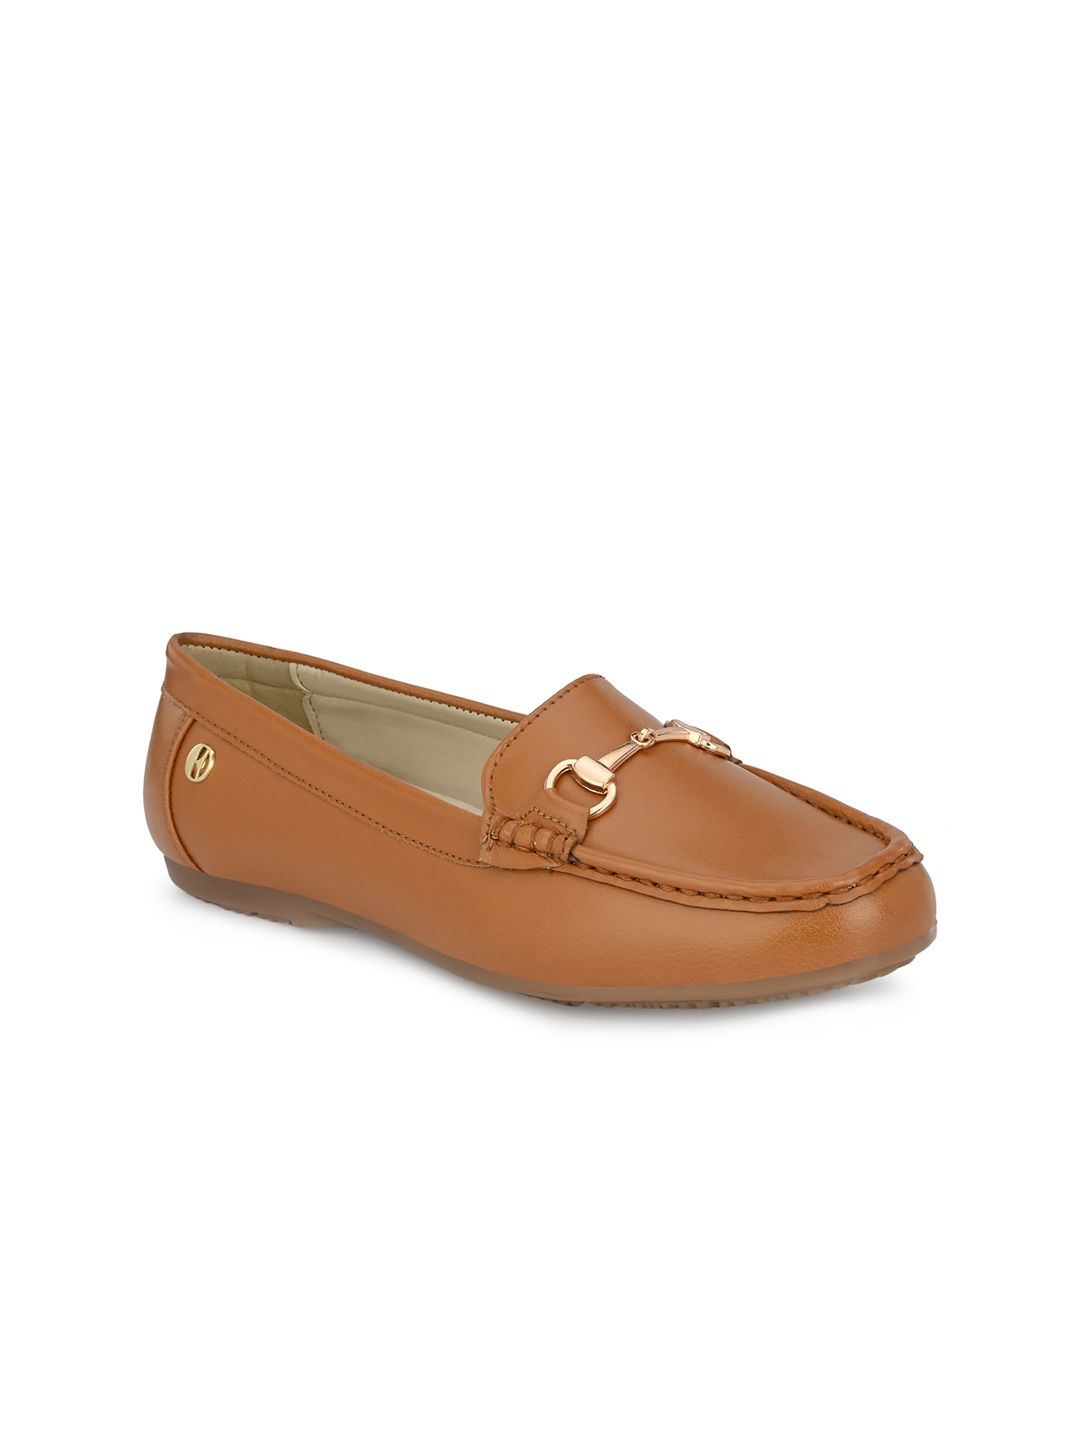 ELLE Women Solid Penny Loafers Price in India